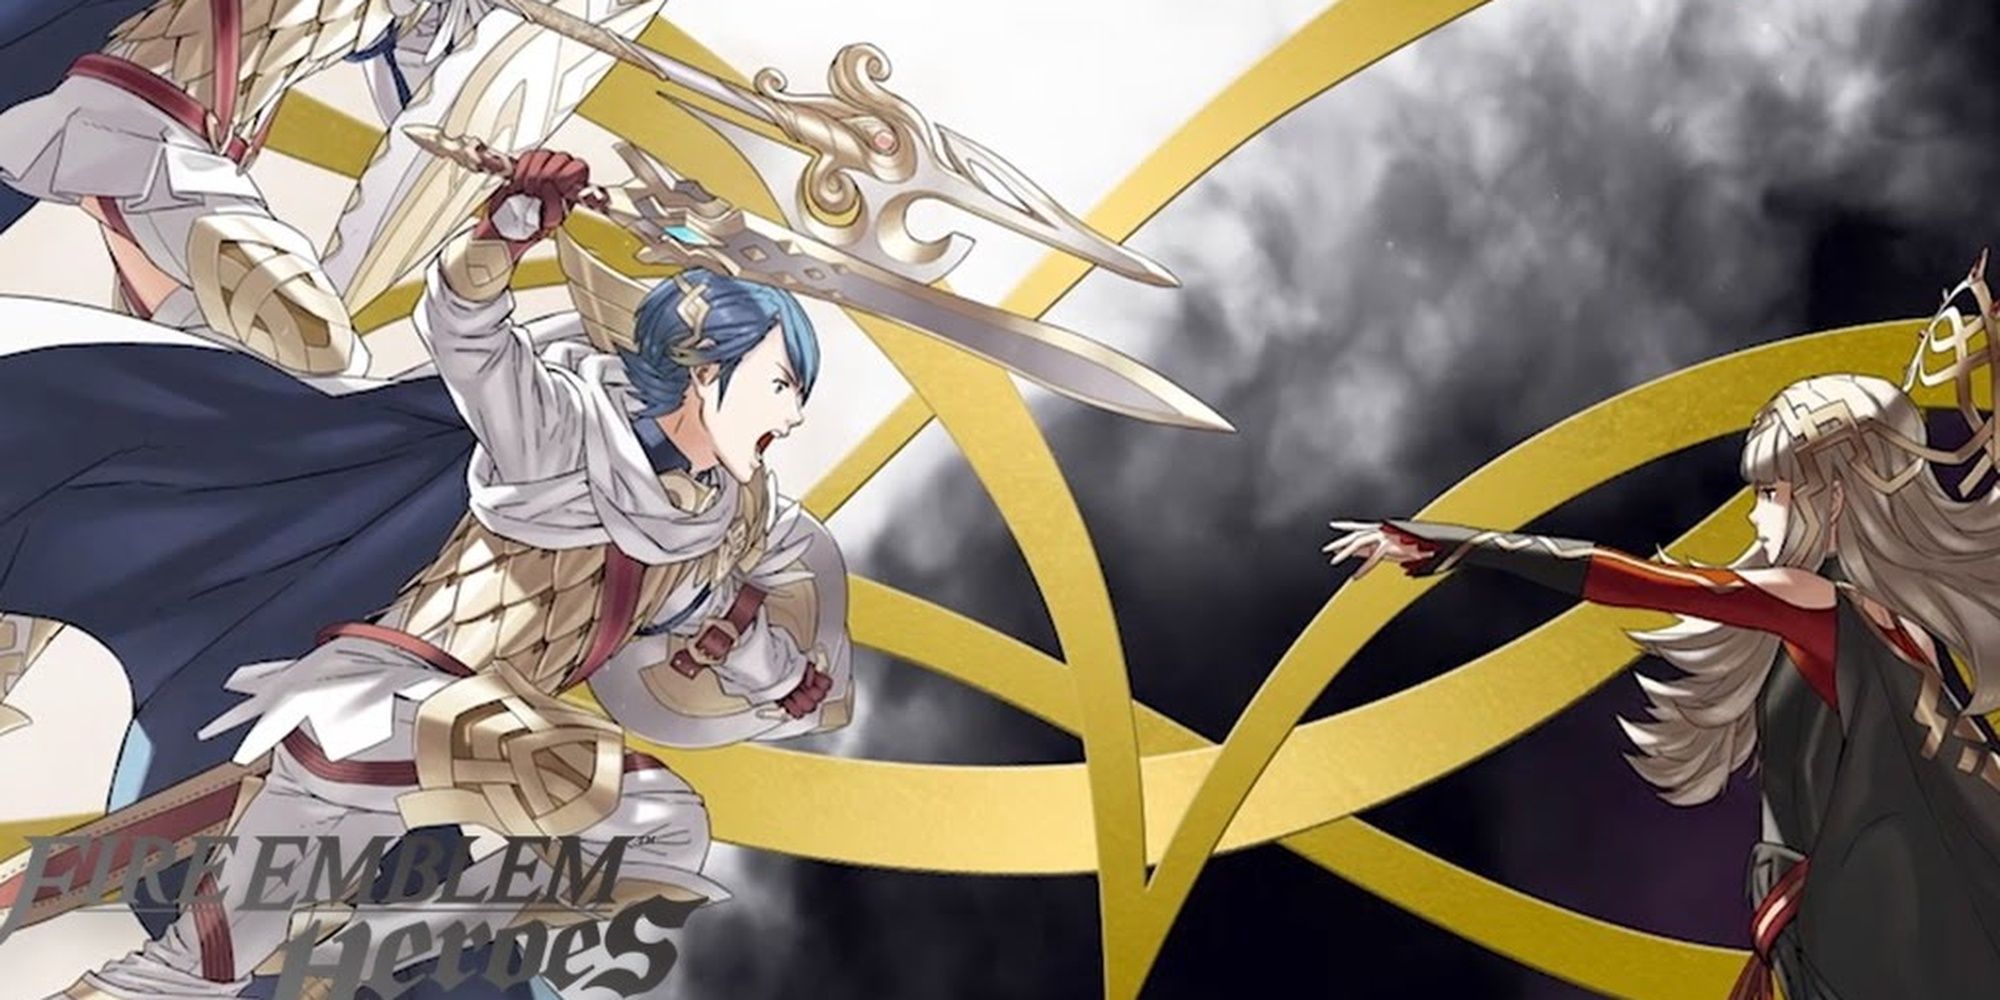 promotional art of fire emblem heroes with protagonist attacking